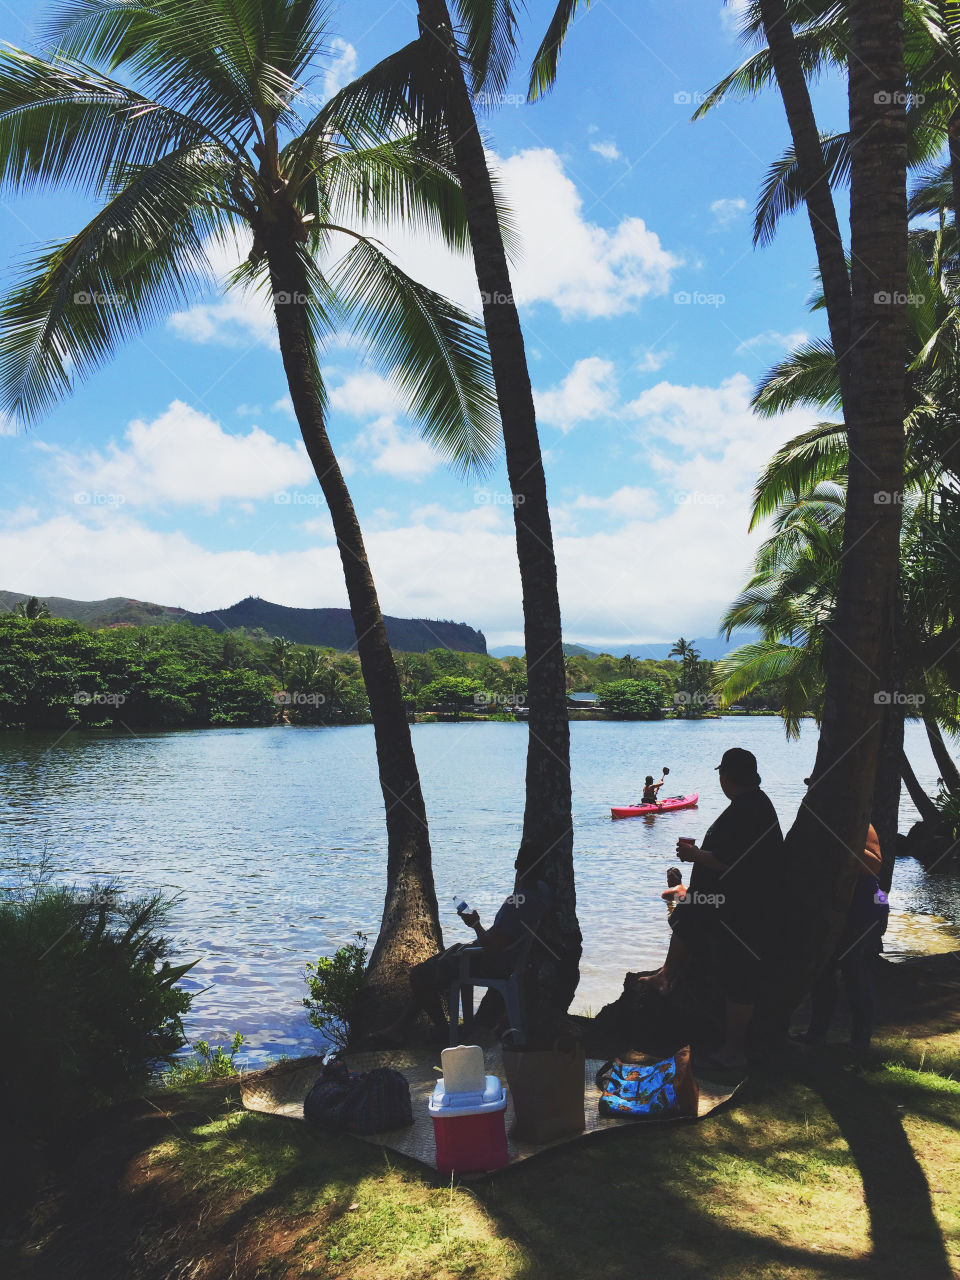 Summertime kayaking and coconut trees